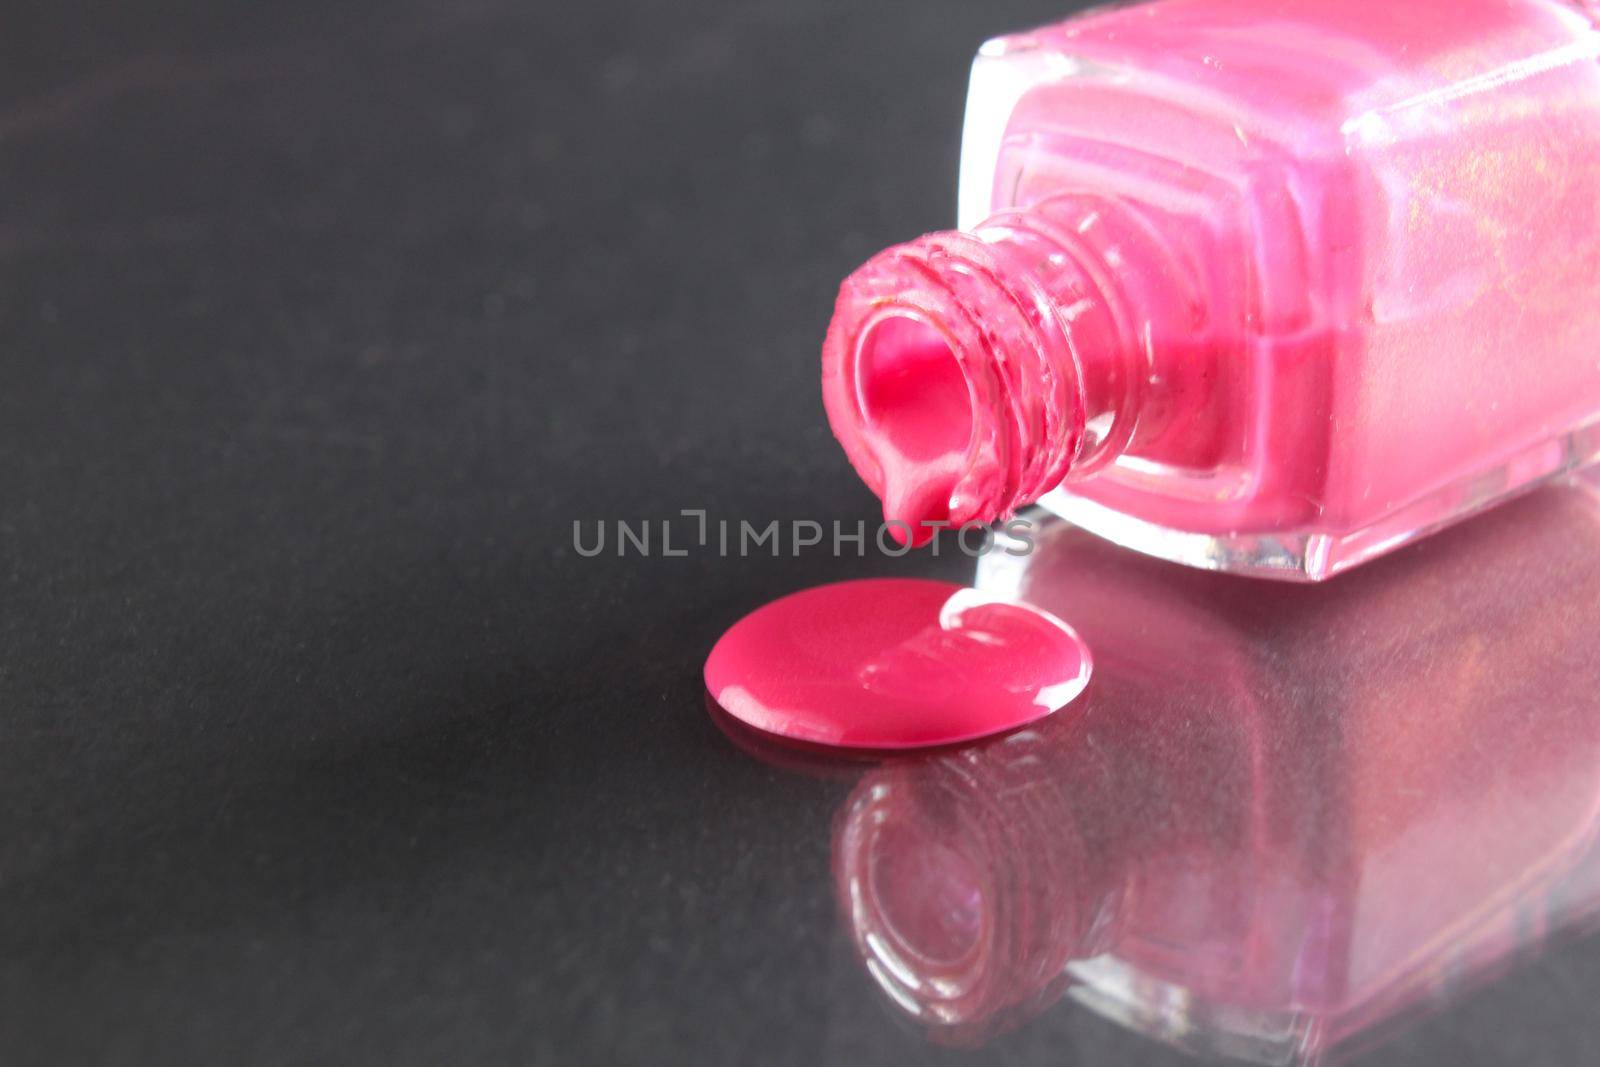 Pink nail polish is poured out of the bottle bottle on a black background with a copyspace place for text by Shoba